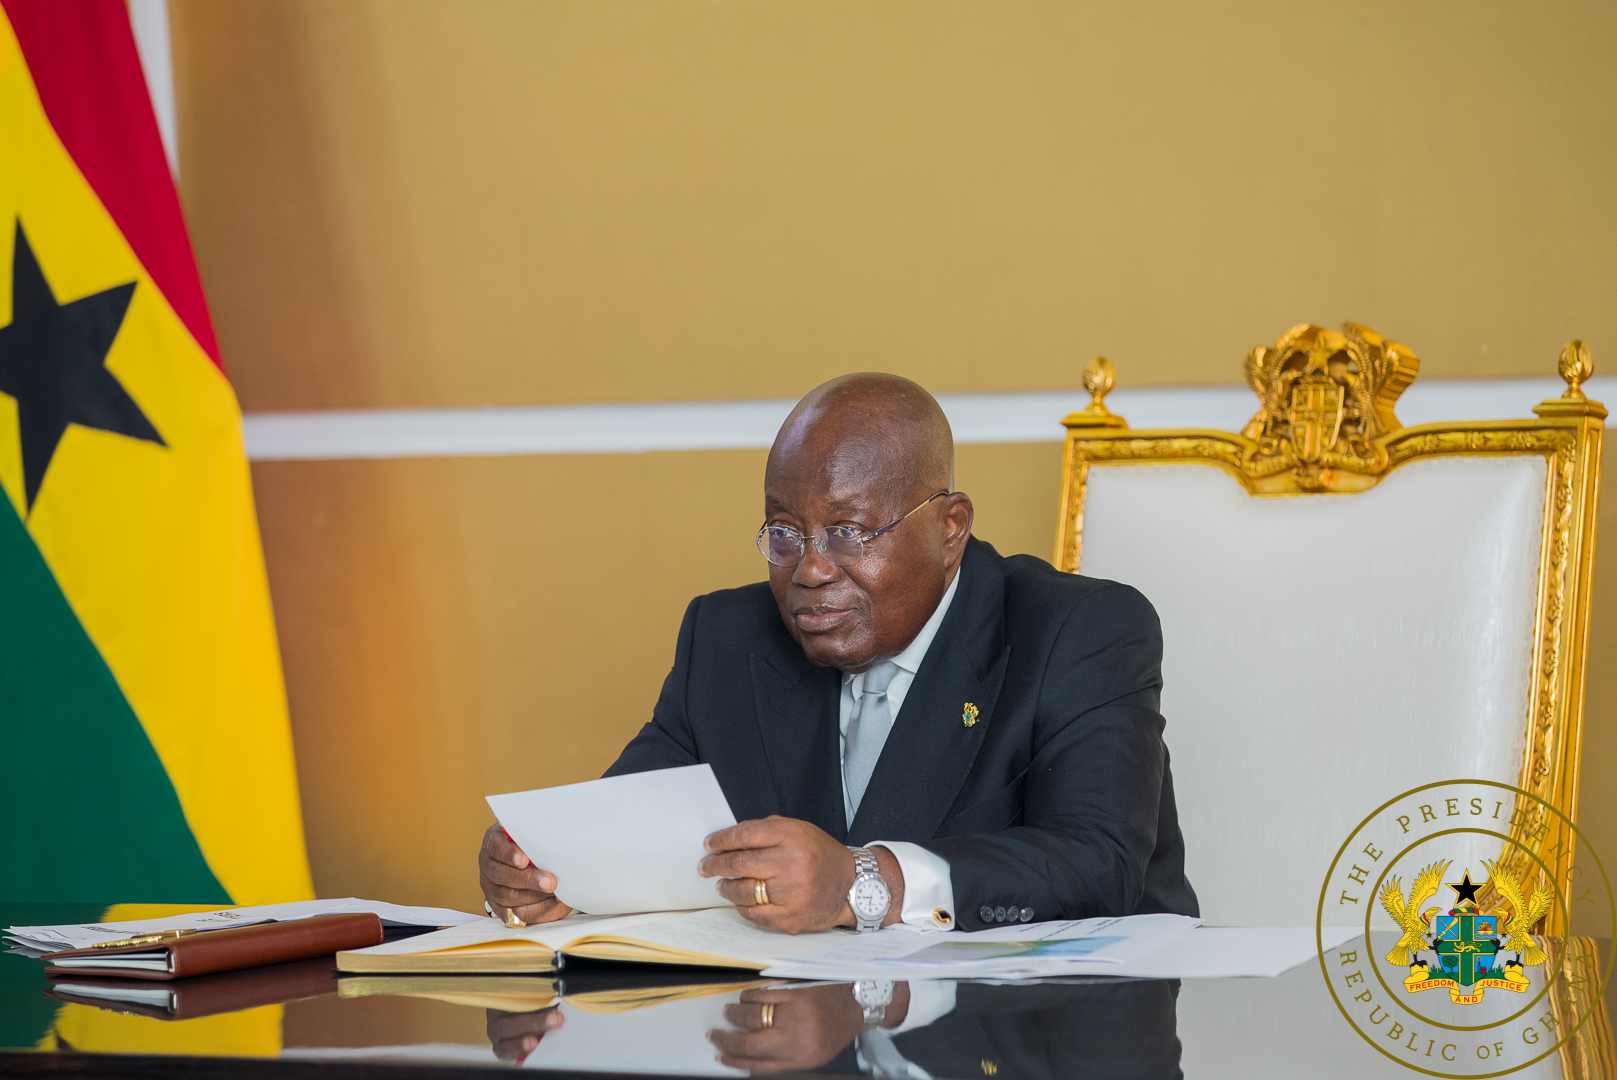 "Any legislation we pass must be in complete alignment with the provisions of our Constitution' - Akufo-Addo